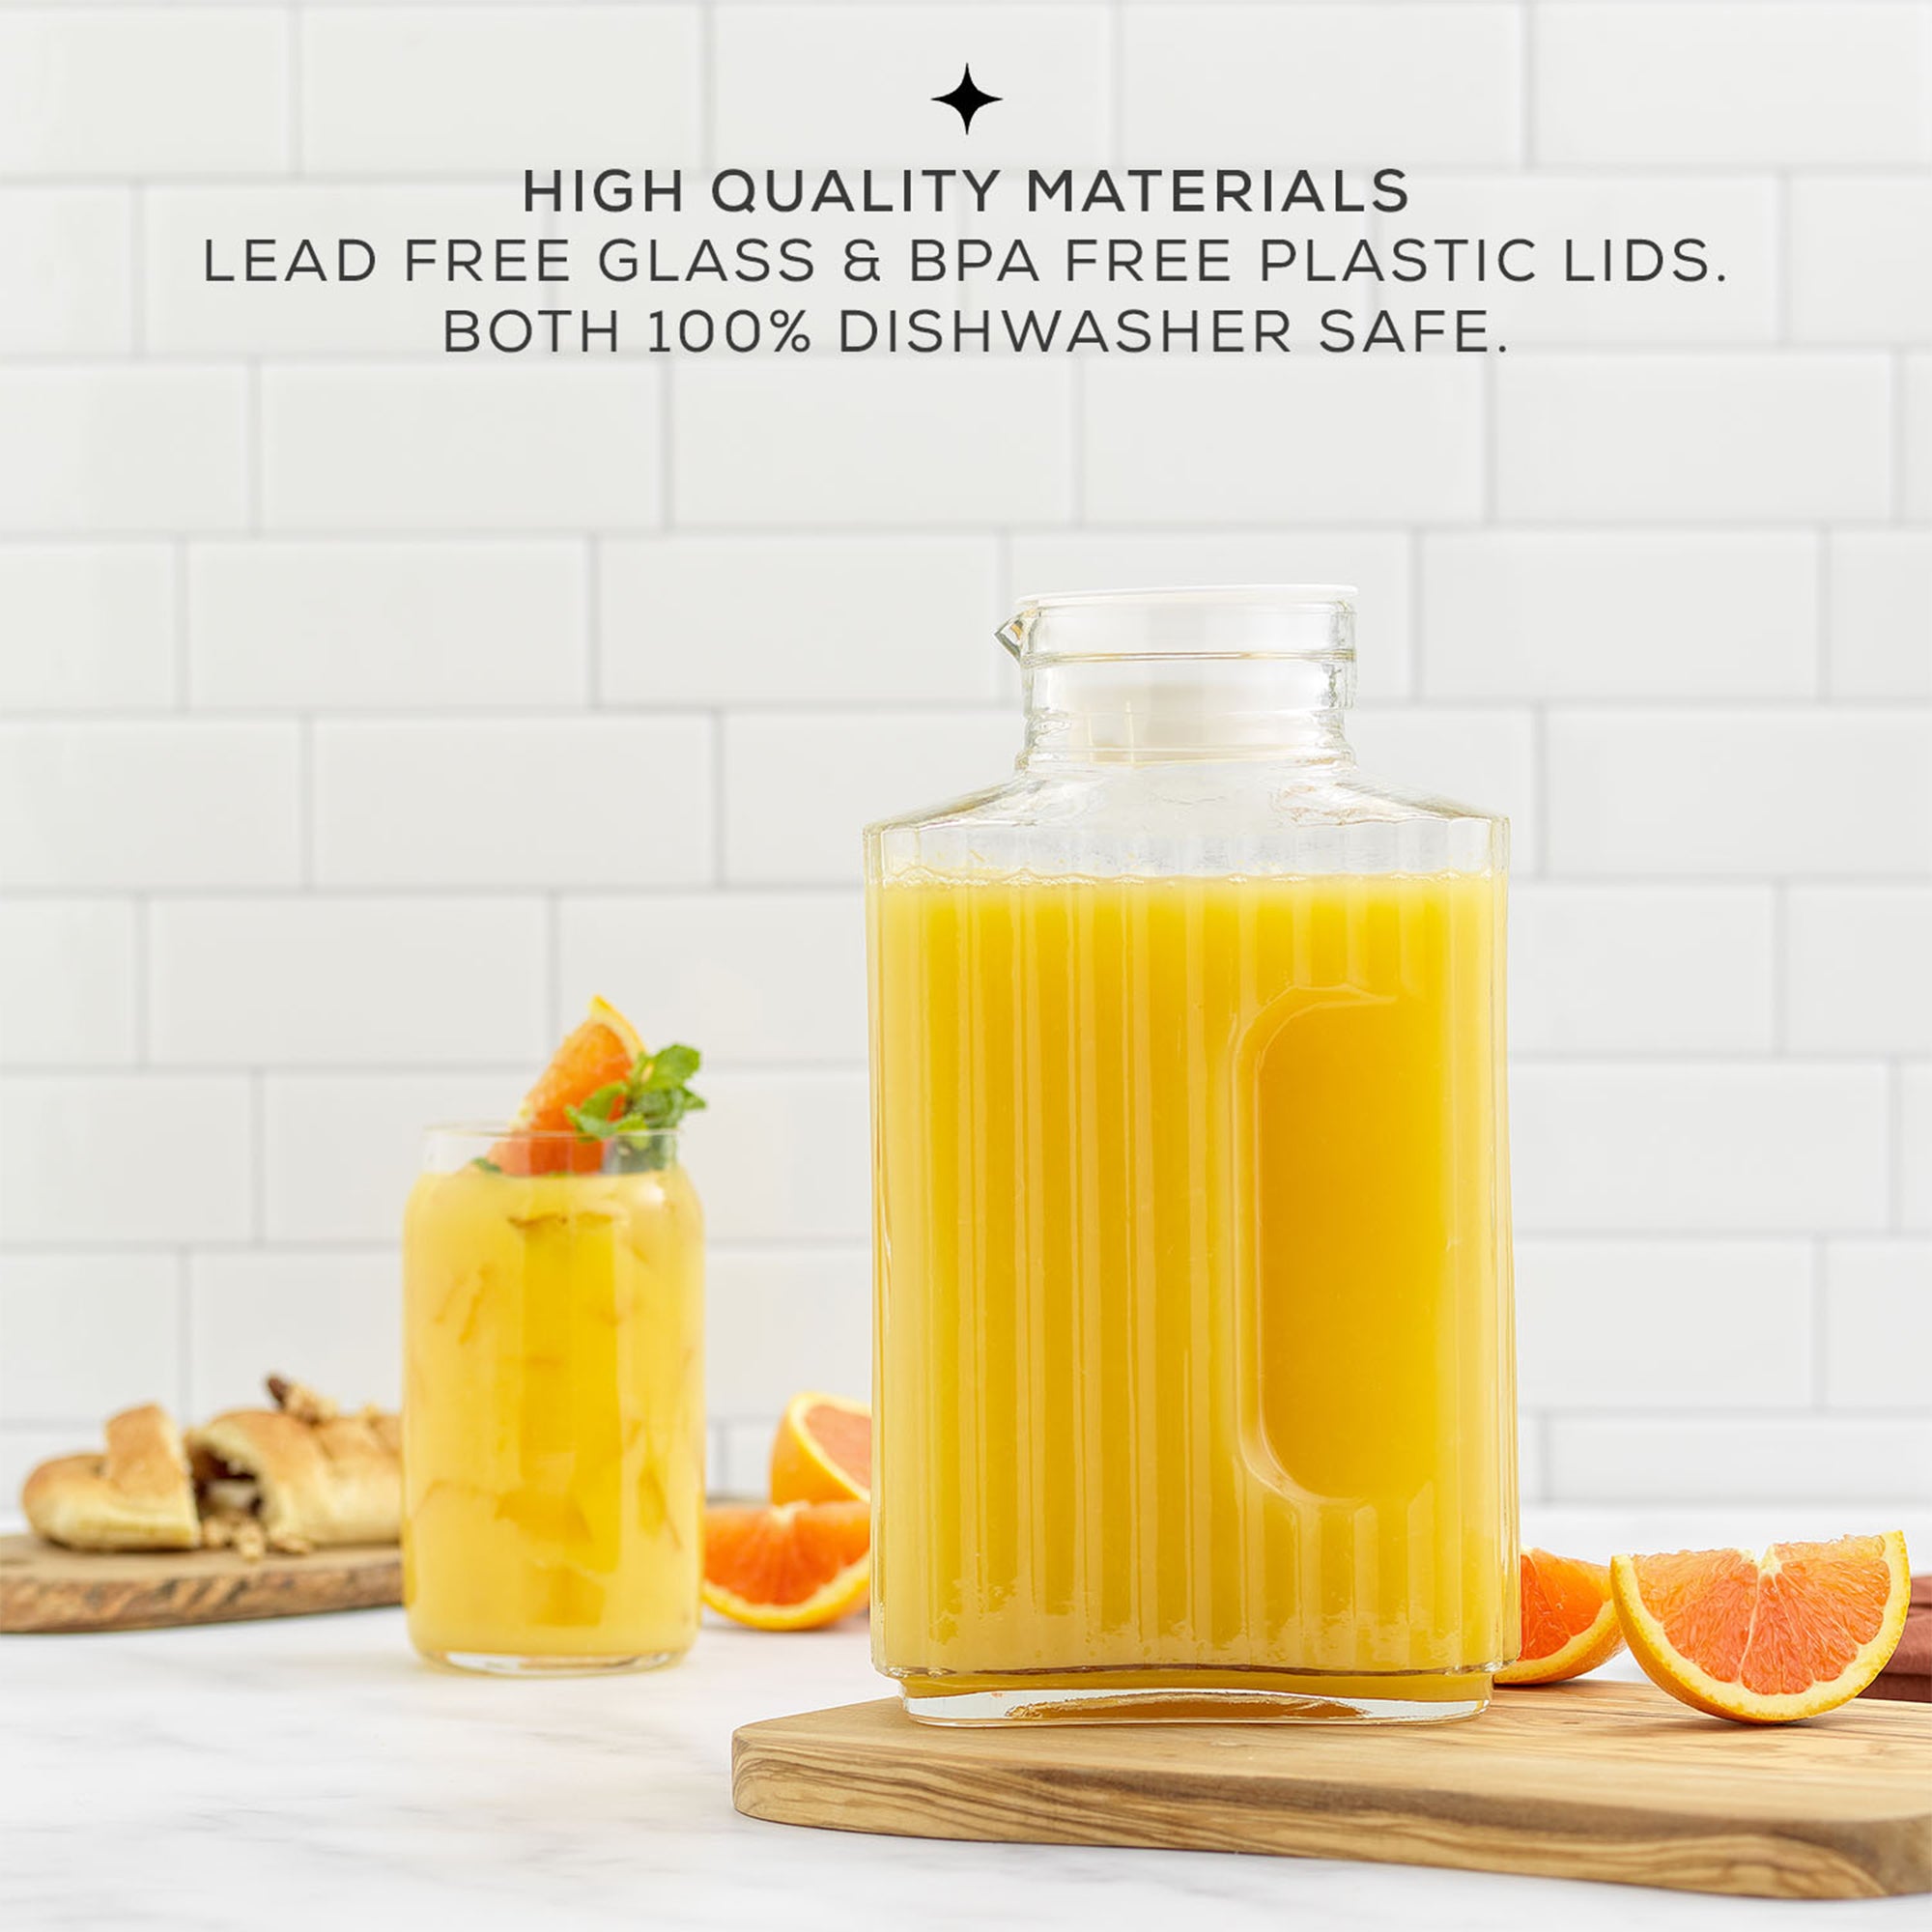 A JoyJolt Beverage Serveware Glass Pitcher filled with orange juice sits on a table. Text on the image reads: "HIGH QUALITY MATERIALS LEAD FREE GLASS & BPA FREE PLASTIC LIDS. BOTH 100% DISHWASHER SAFE."